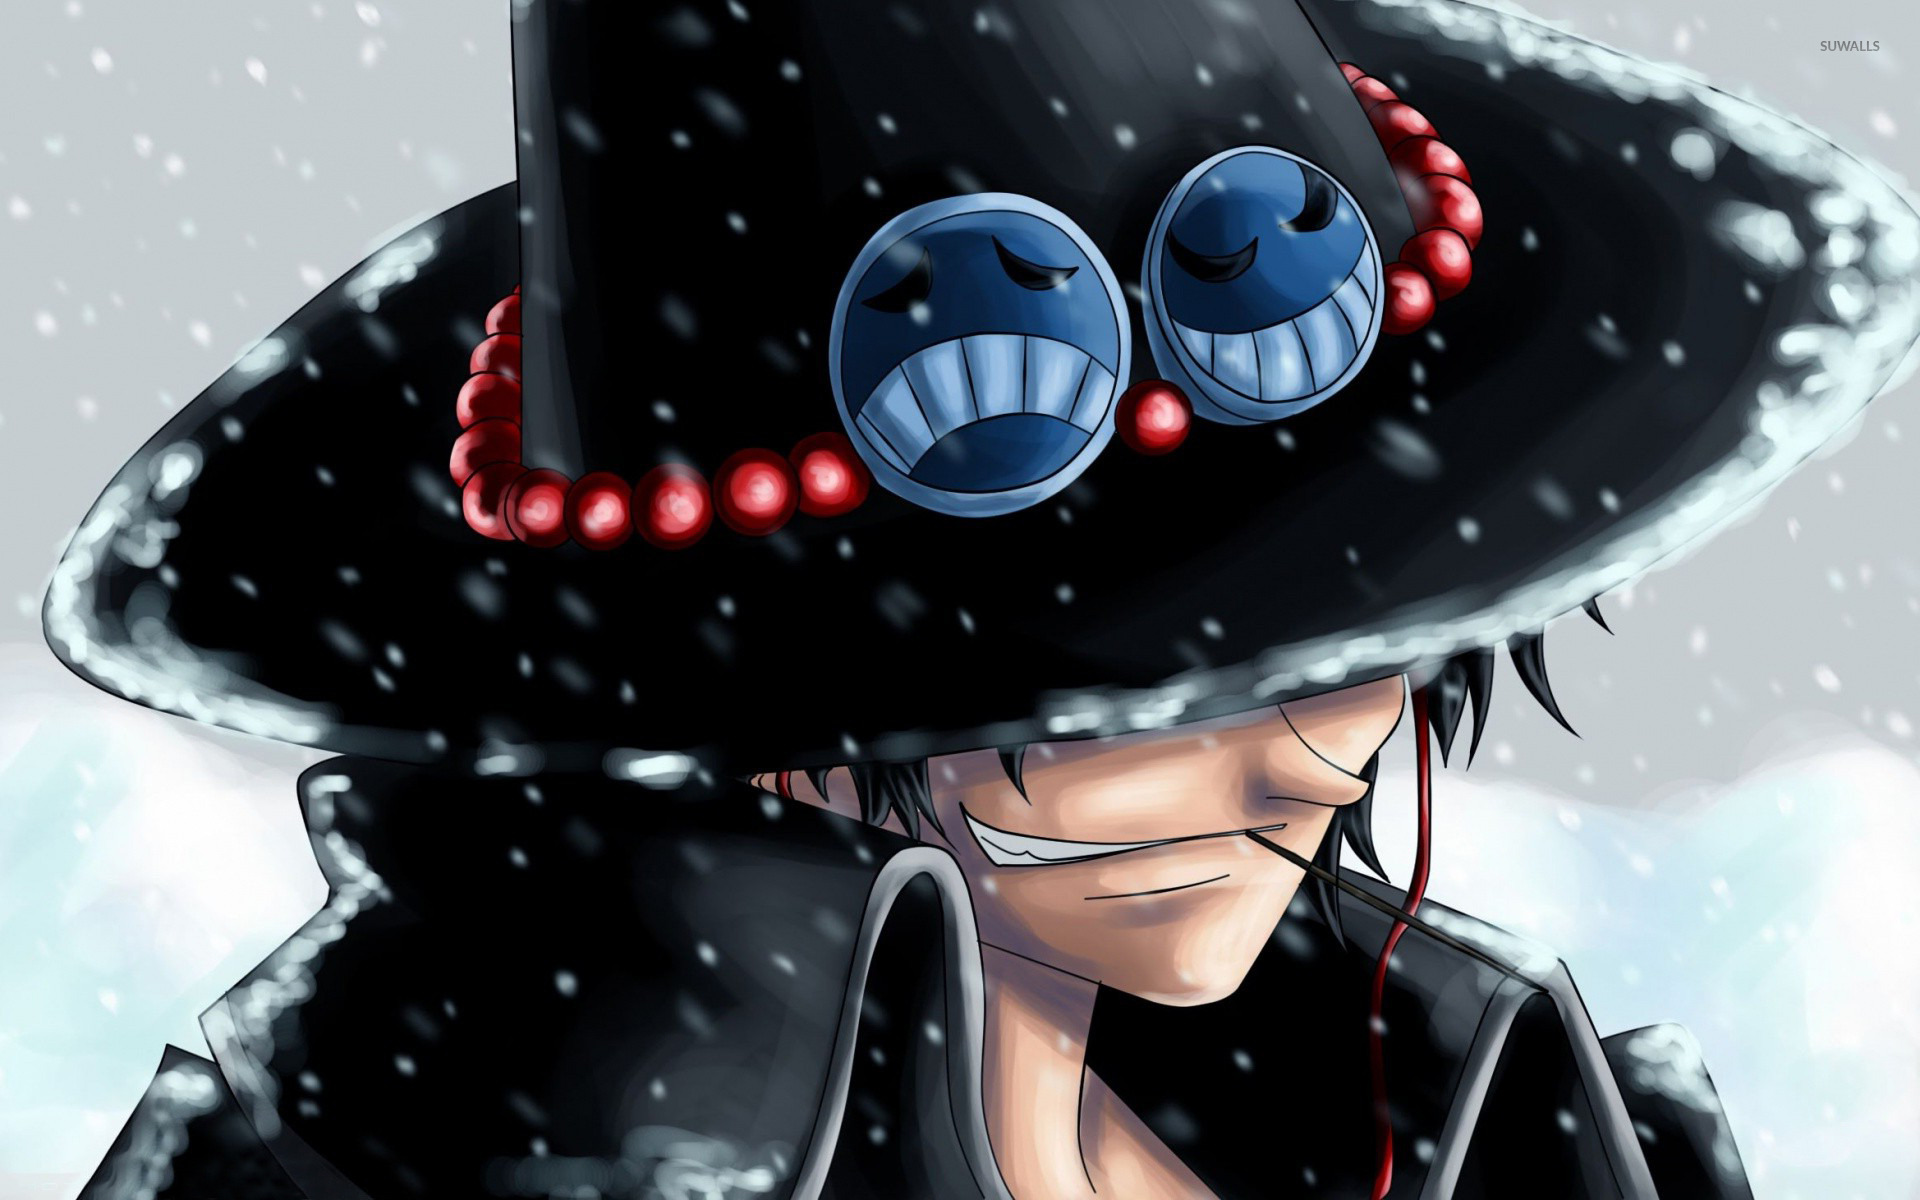 Monkey D. Luffy - One Piece wallpaper - Anime wallpapers - #16252